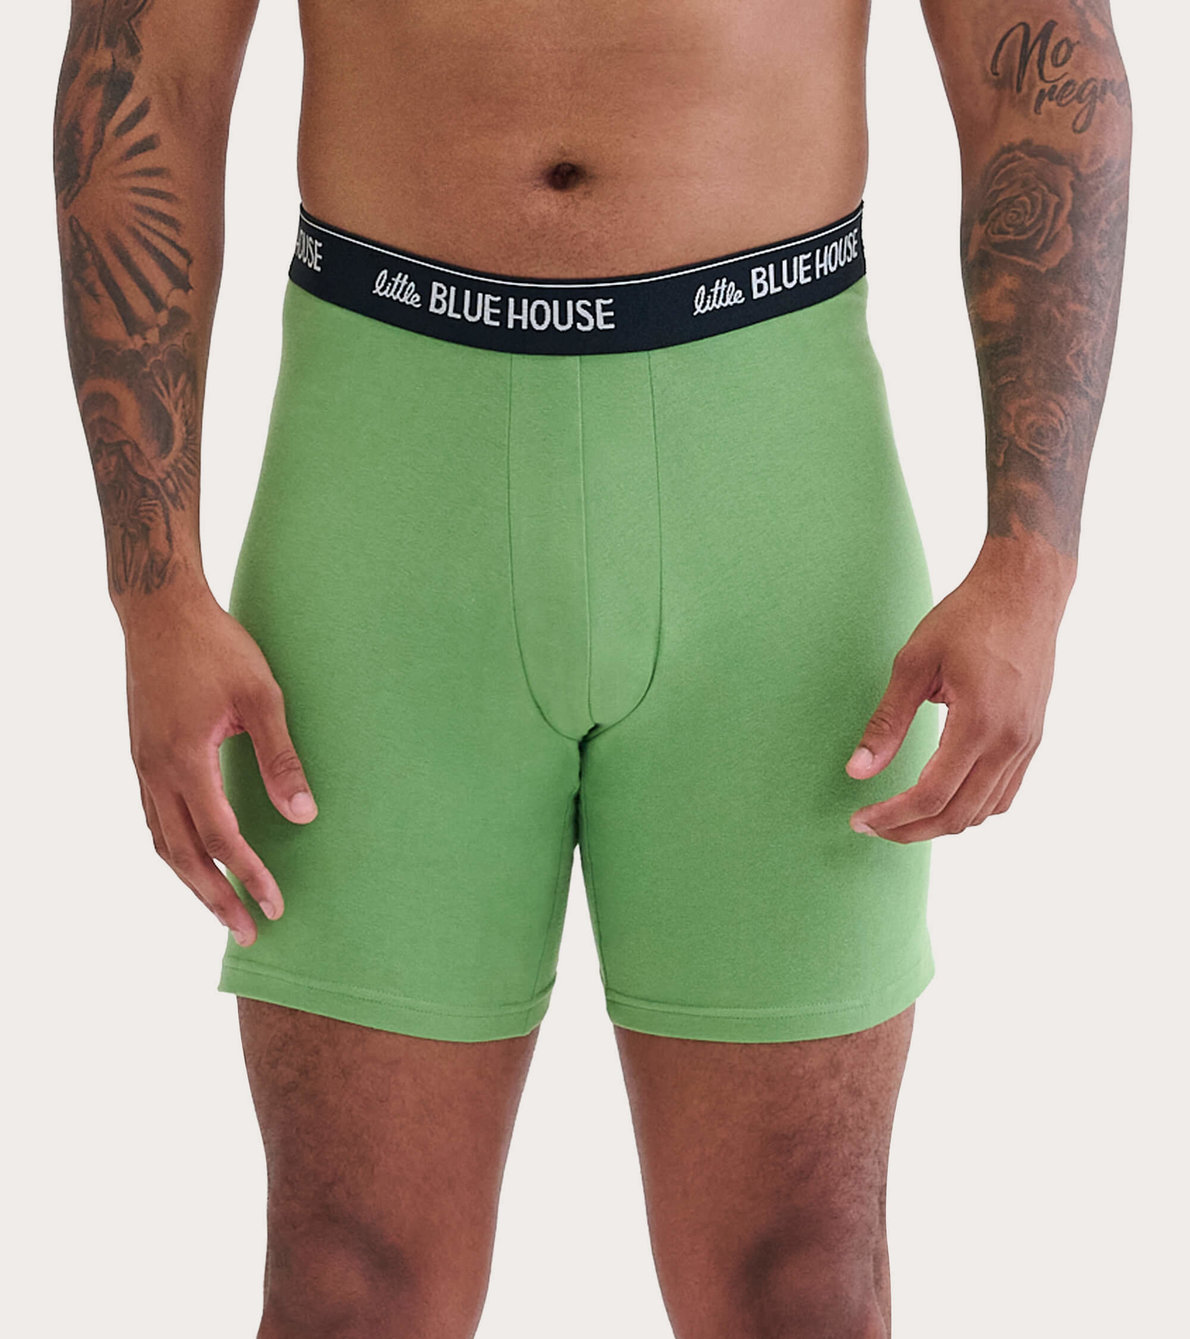 View larger image of Game Of Inches Men's Boxer Brief